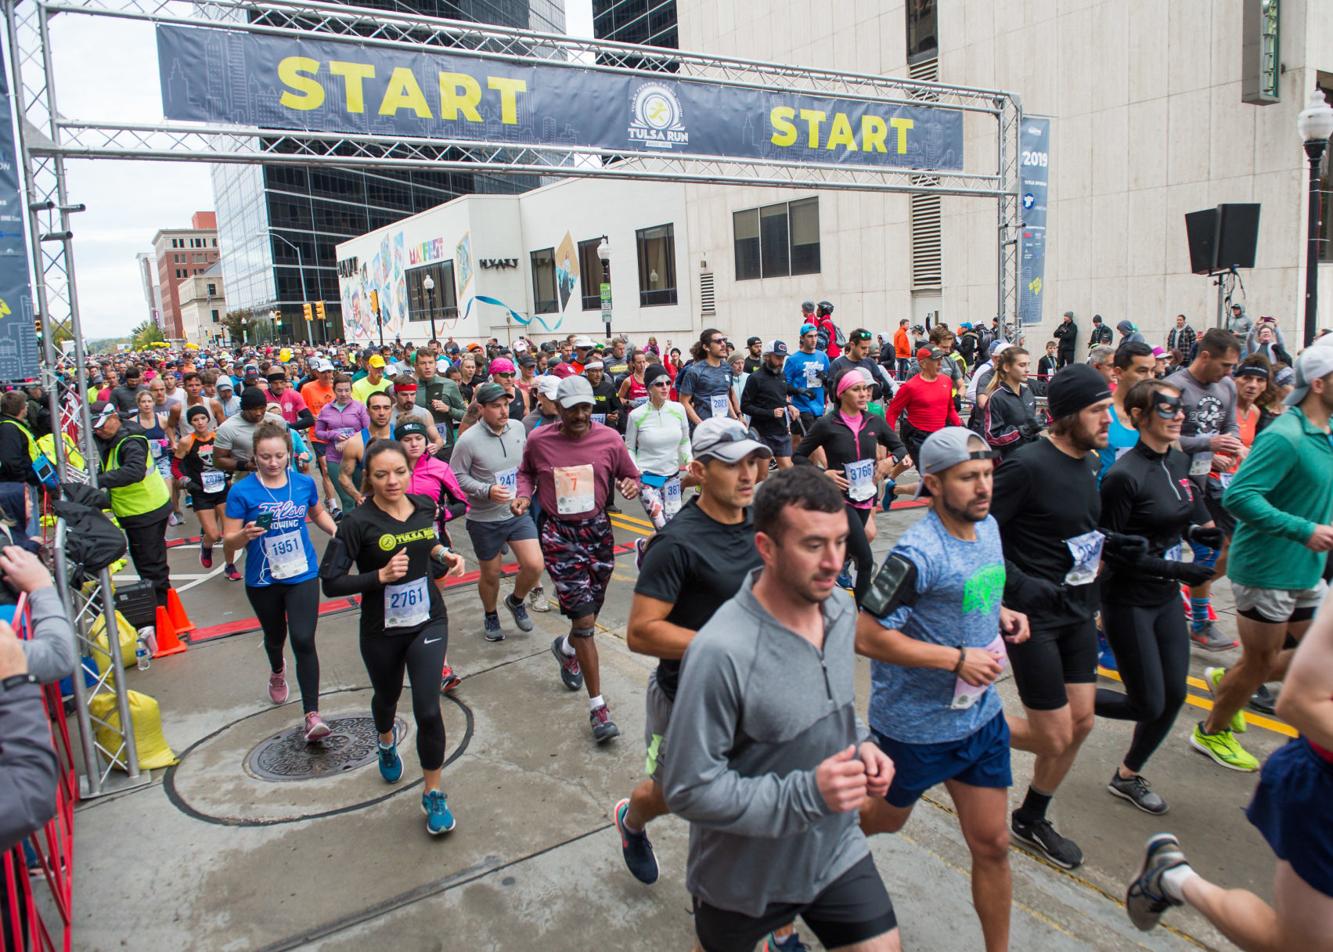 Gallery Thousands turn up for the 42nd annual Tulsa Run Local News